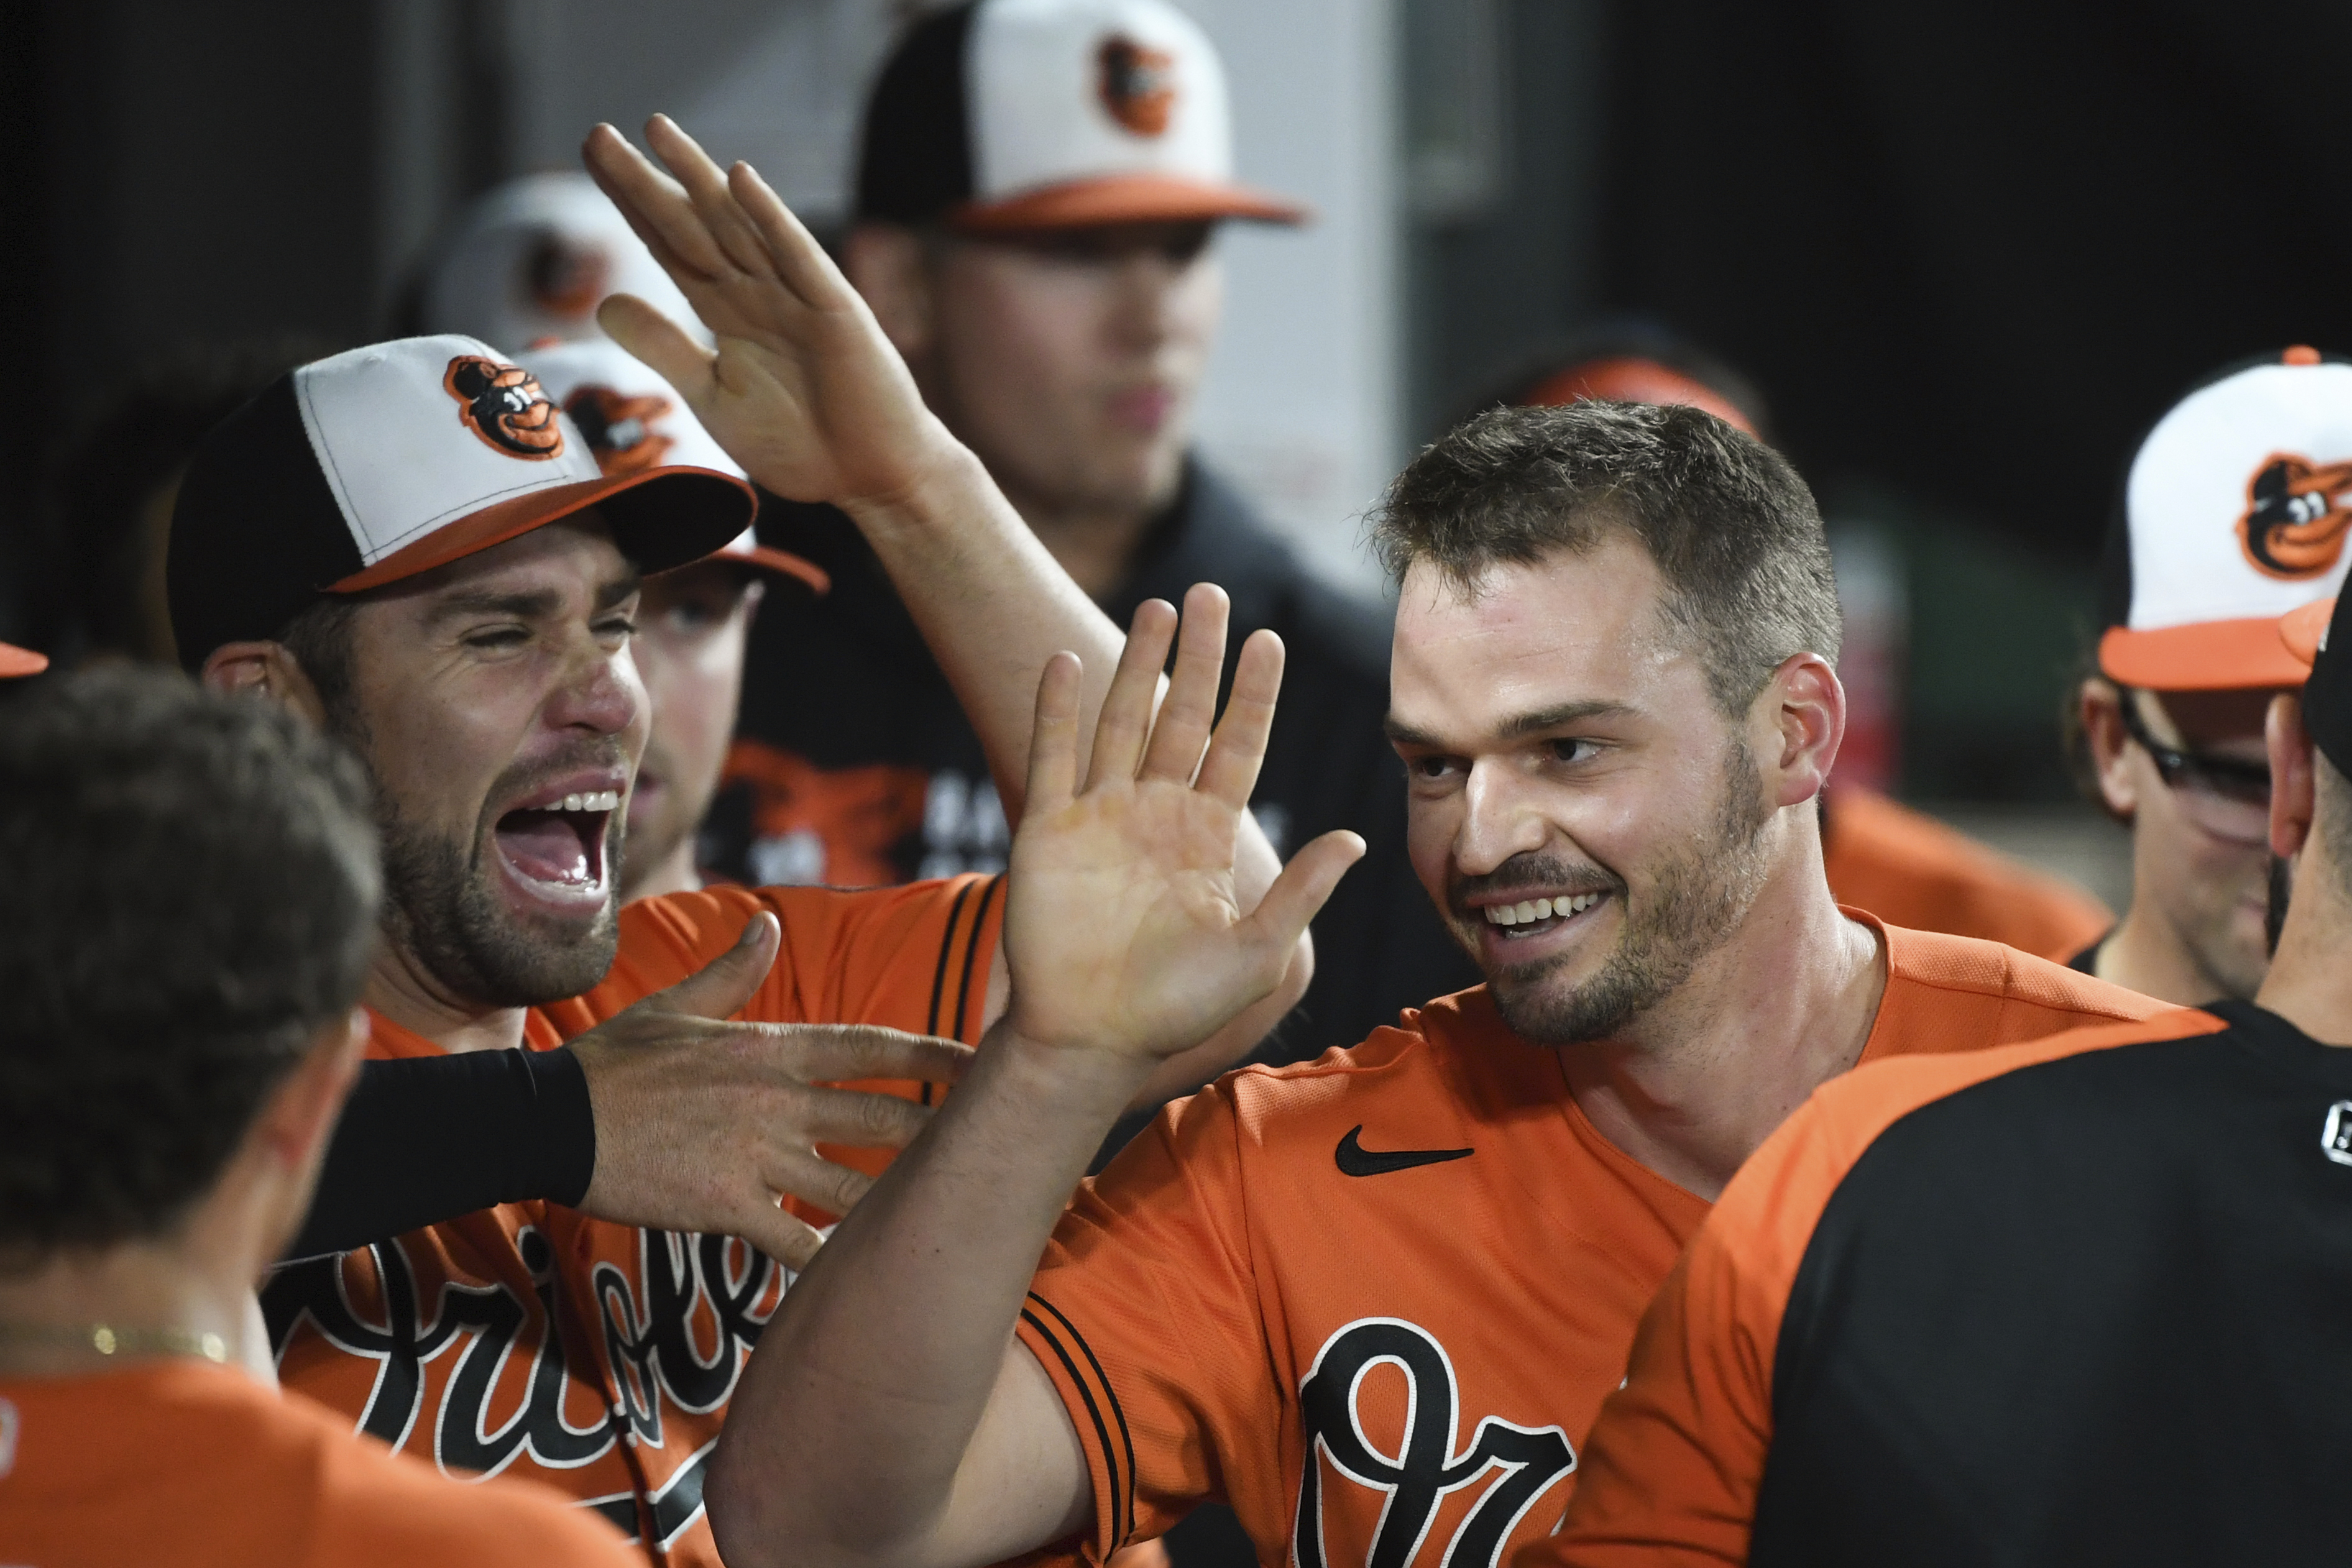 Orioles OF Trey Mancini is cancer-free, ready for 2021 Spring Training -  Sports Illustrated